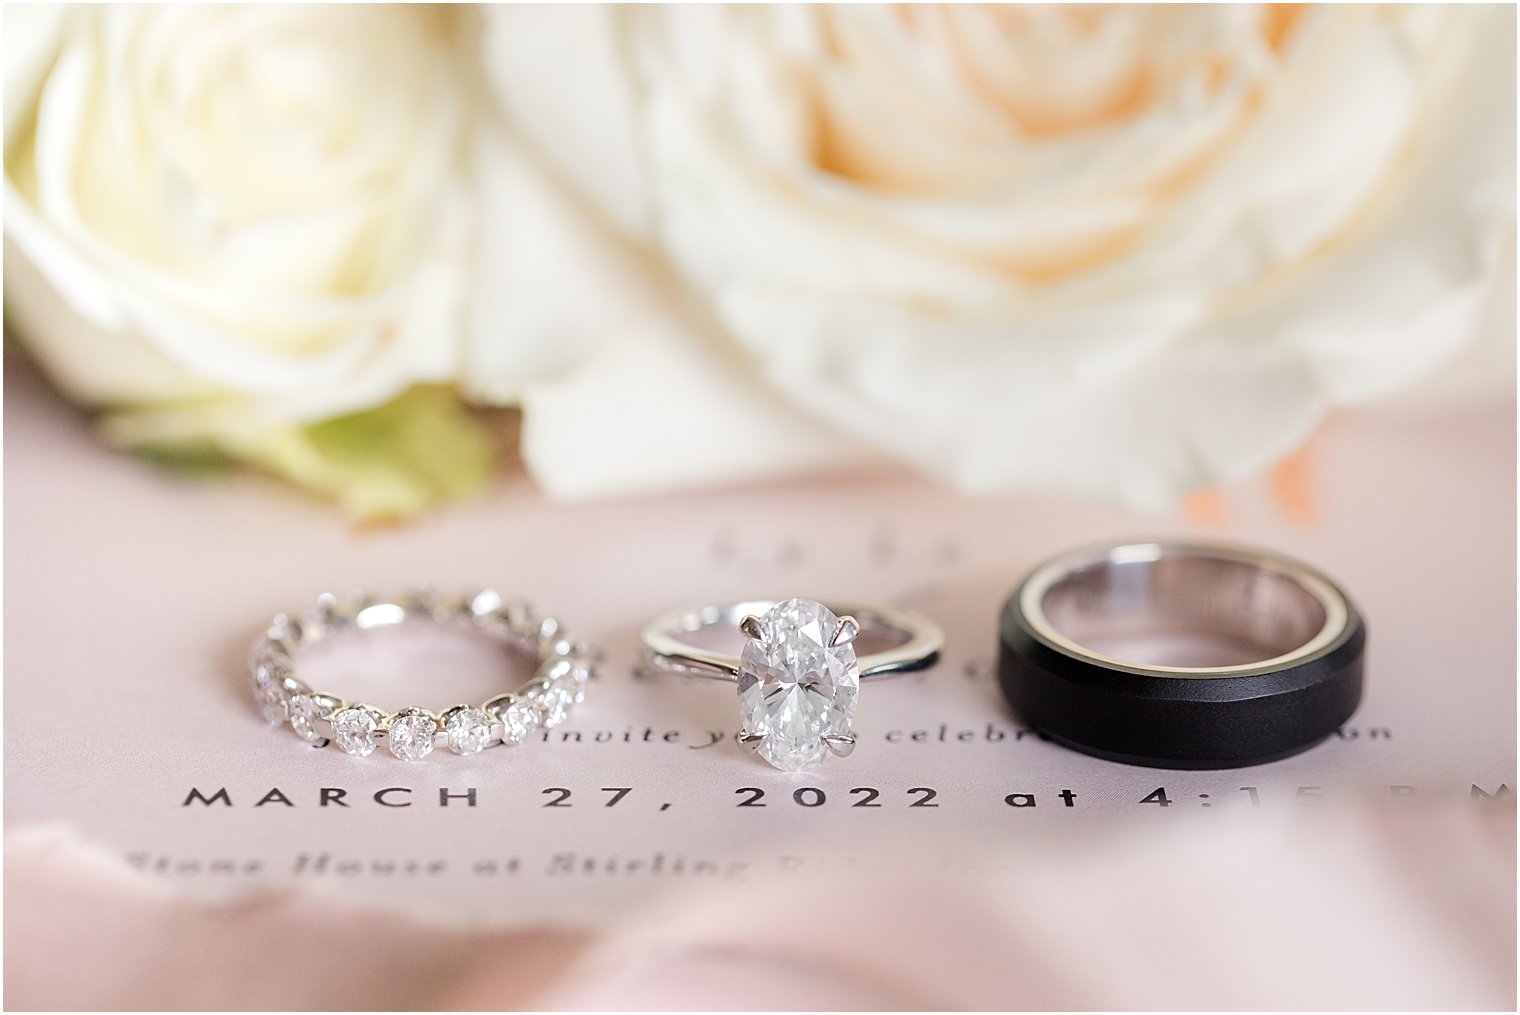 wedding bands rest on invitation suite in front of ivory flowers